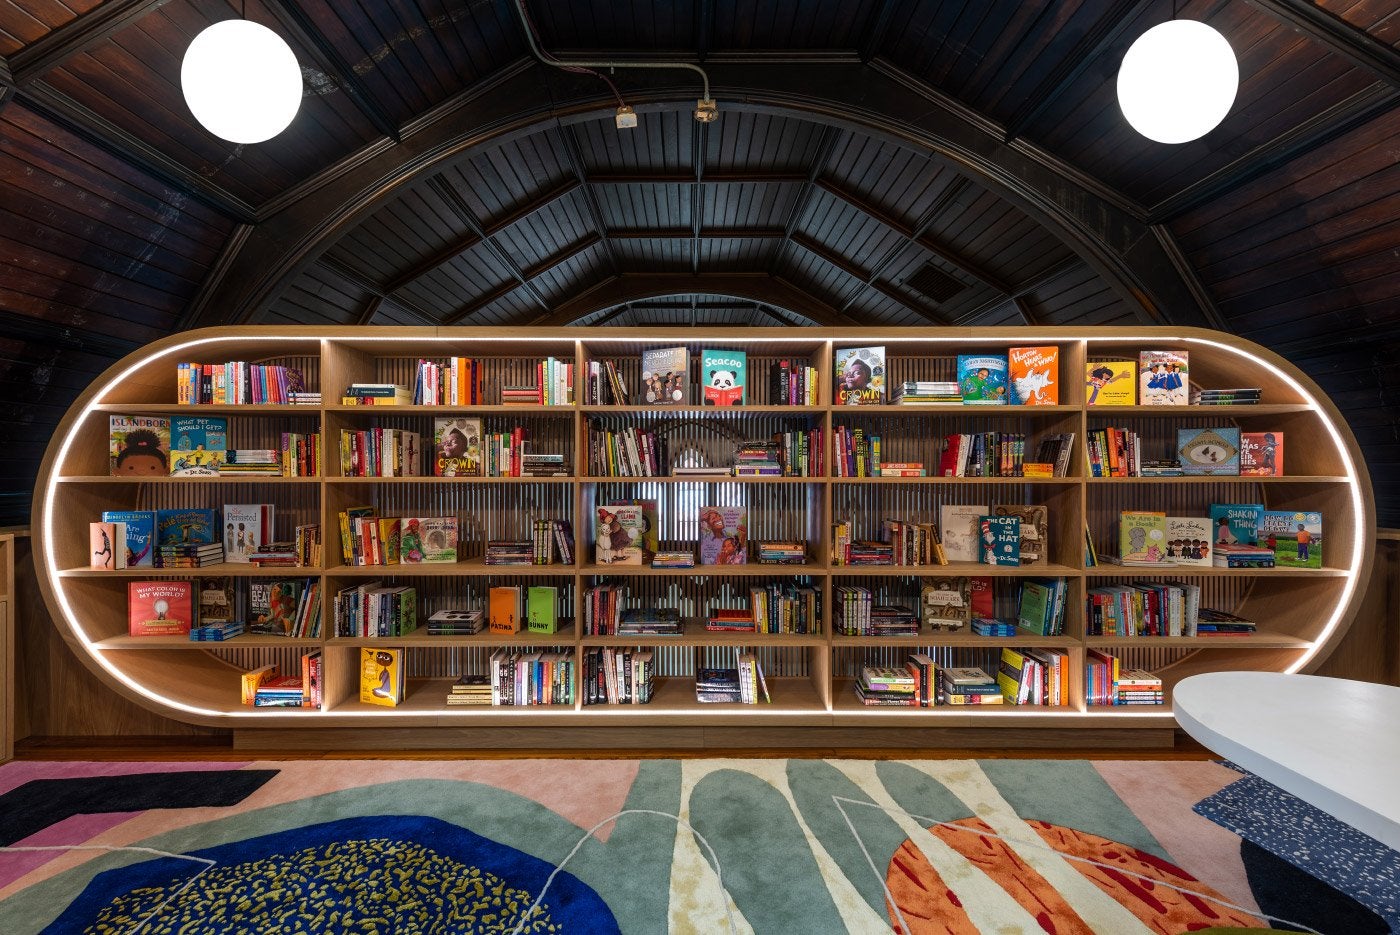 Attention Book Lovers: This Is the Prettiest Kids’ Library Ever